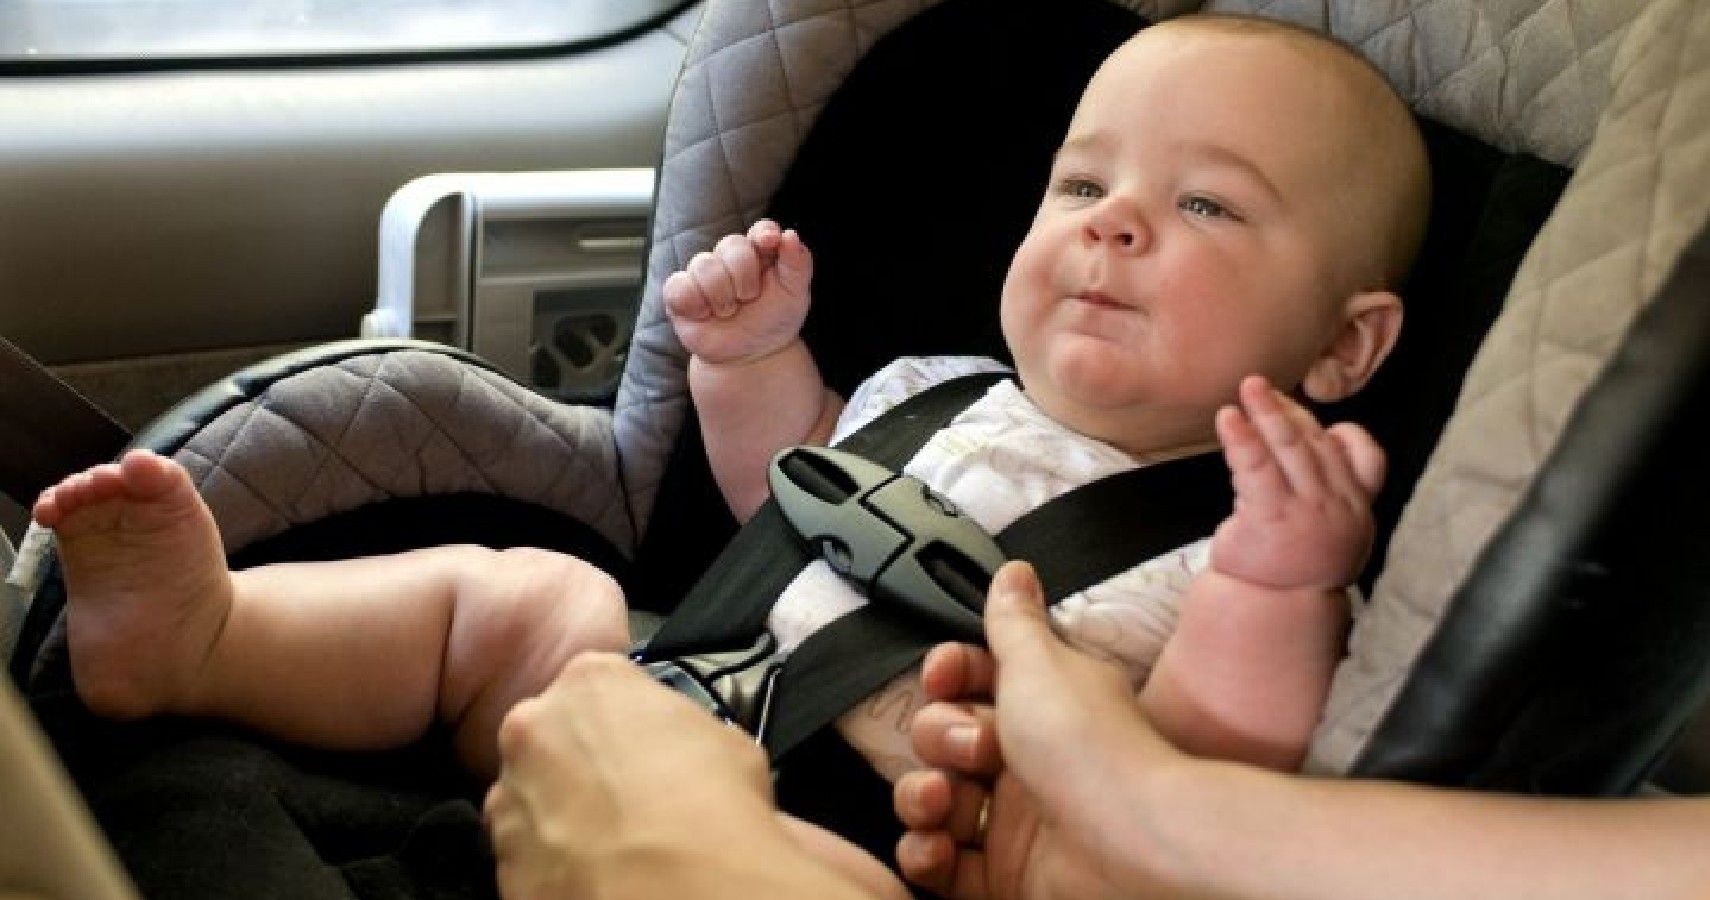 Hot Cars Act Will Prevent Child Hot Car Deaths With Technology In All New Vehicles